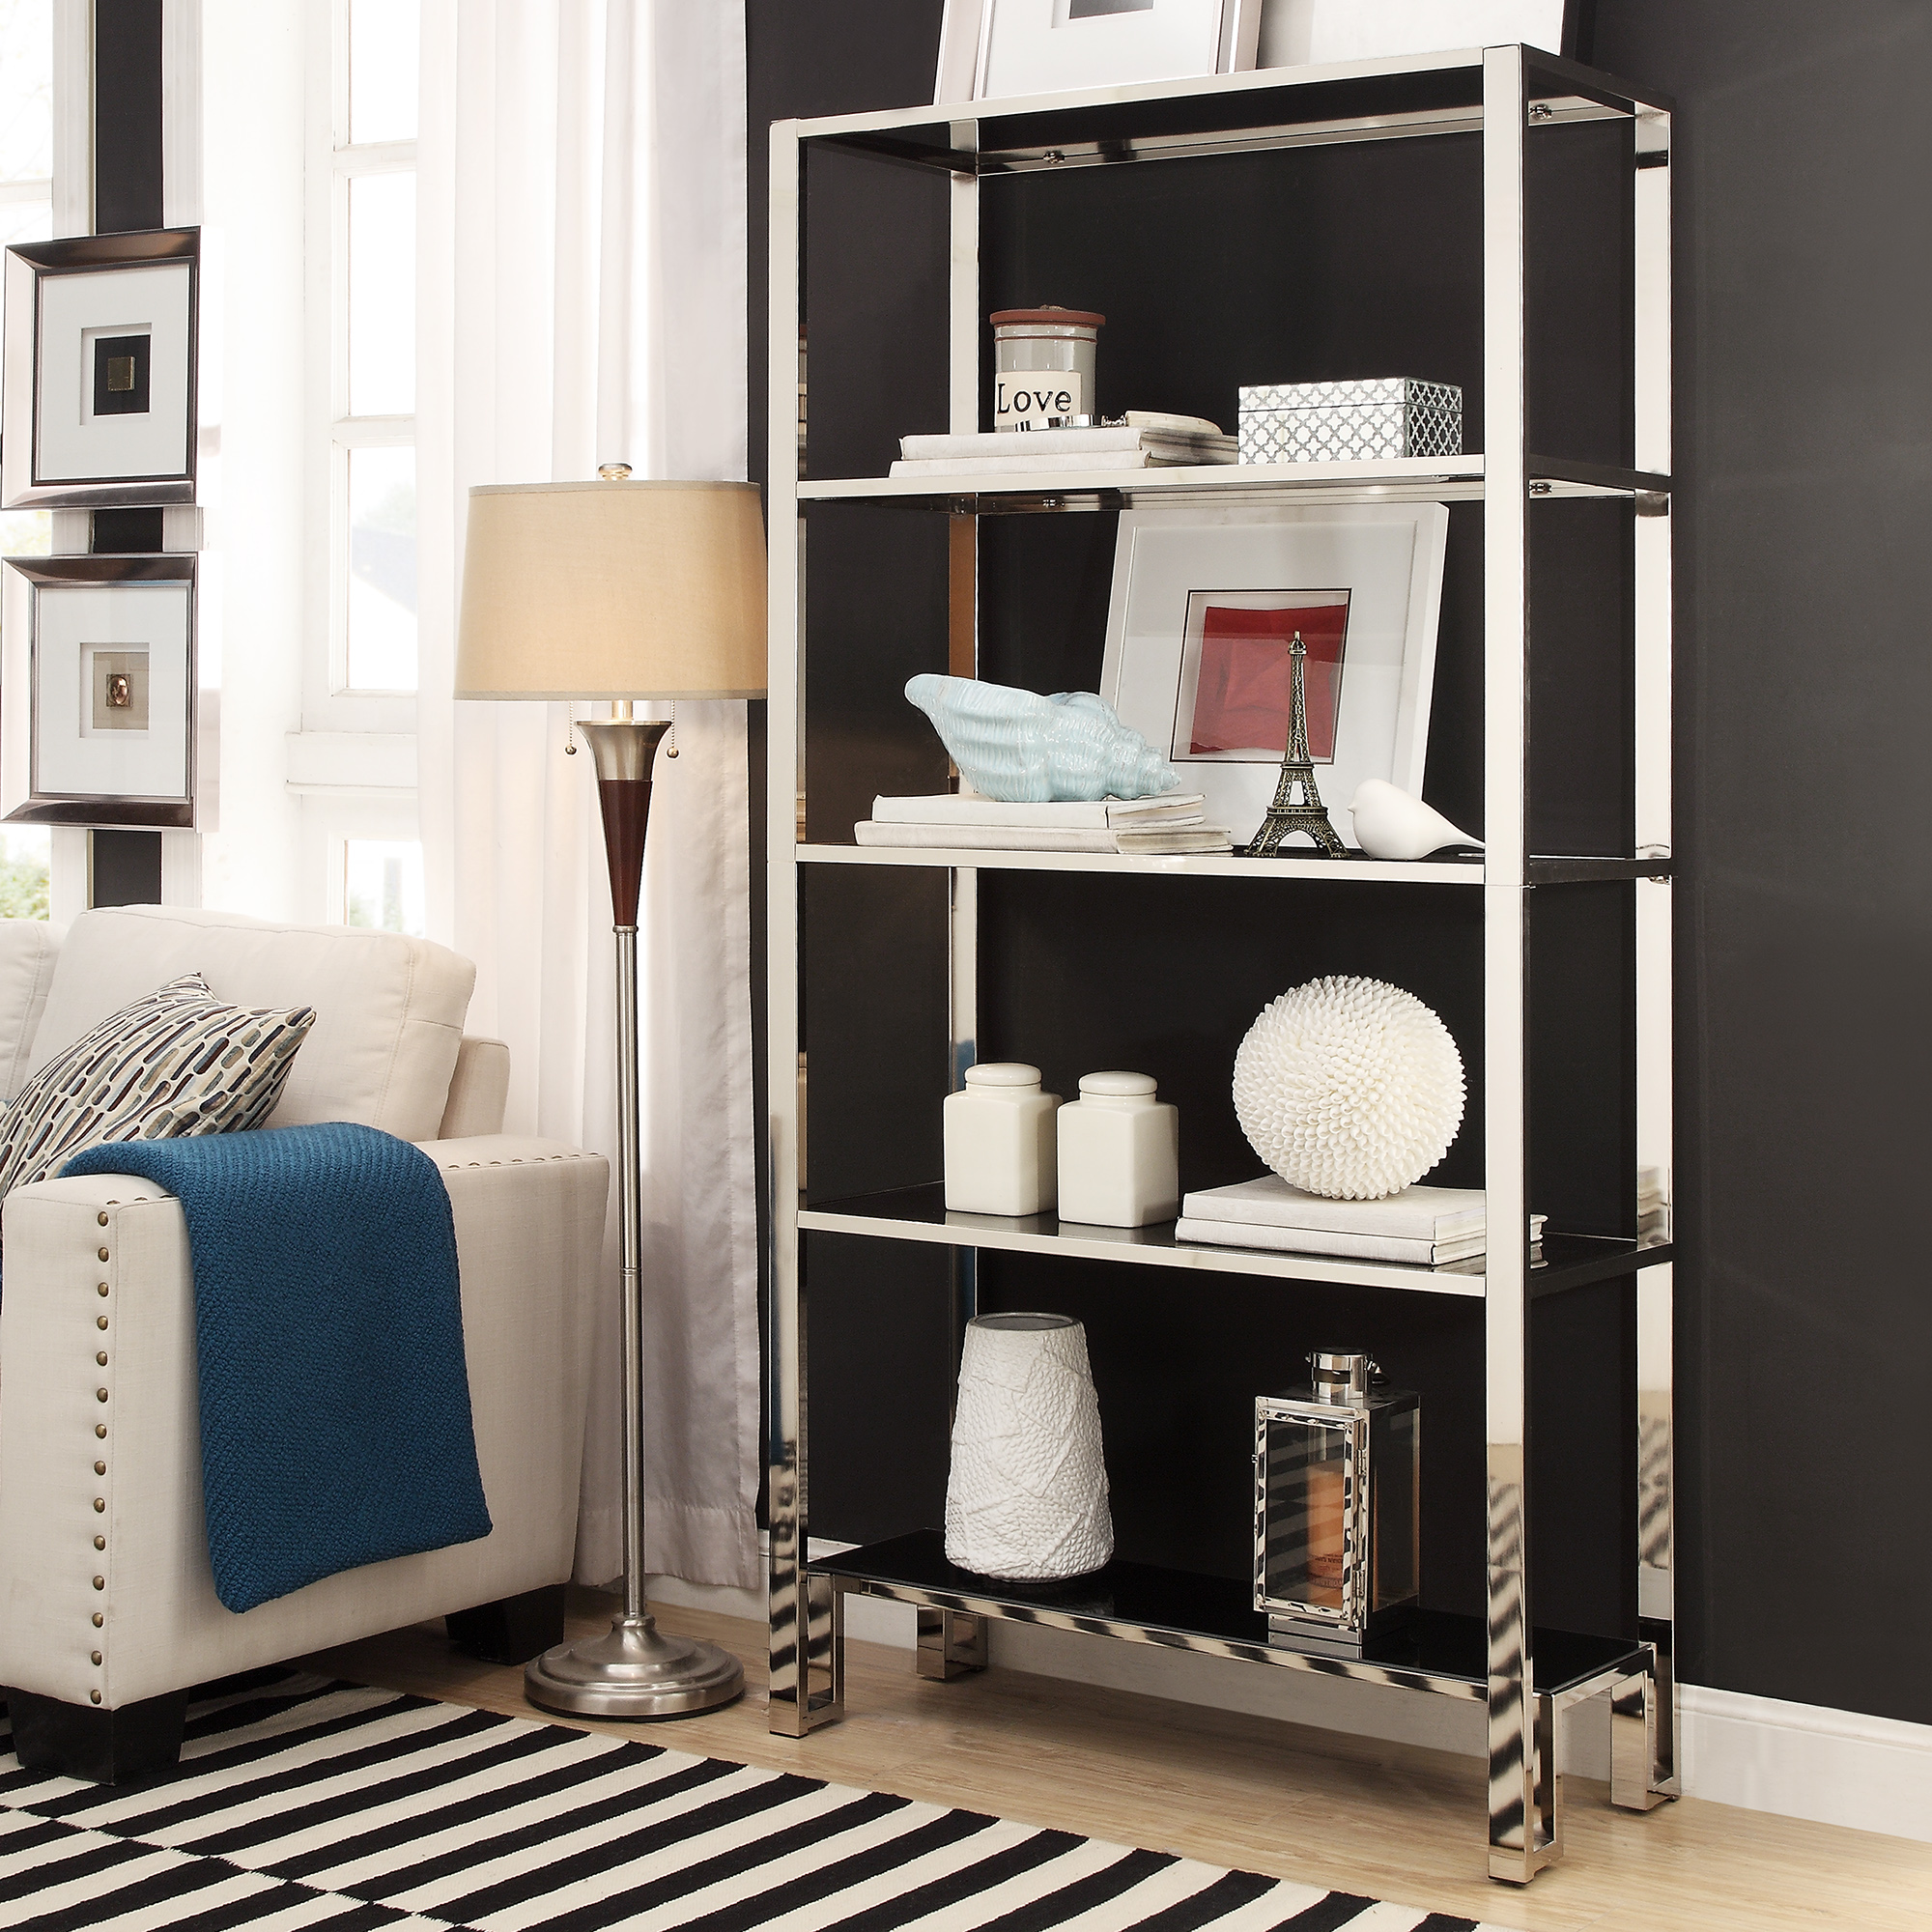 This chrome-finished bookcase is decorate with white and grey pieces of décor. These pieces are complemented by the chrome finish and a nearby white accent chair.